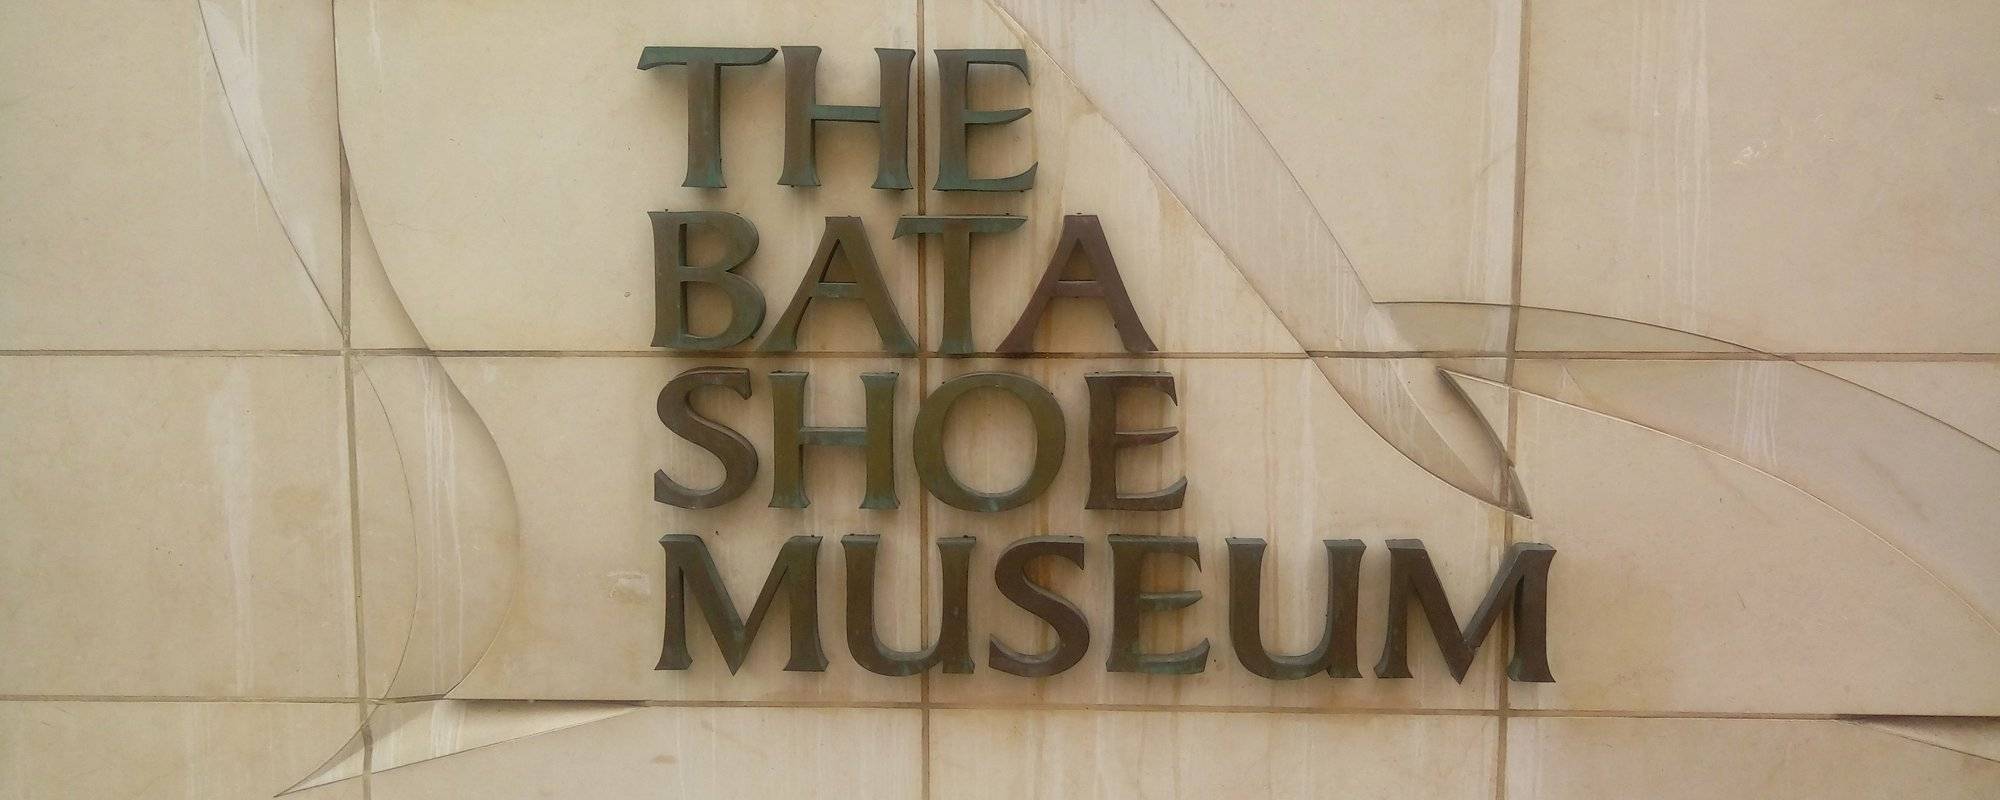 Attention Ladies !!! Have you been to a shoe museum???